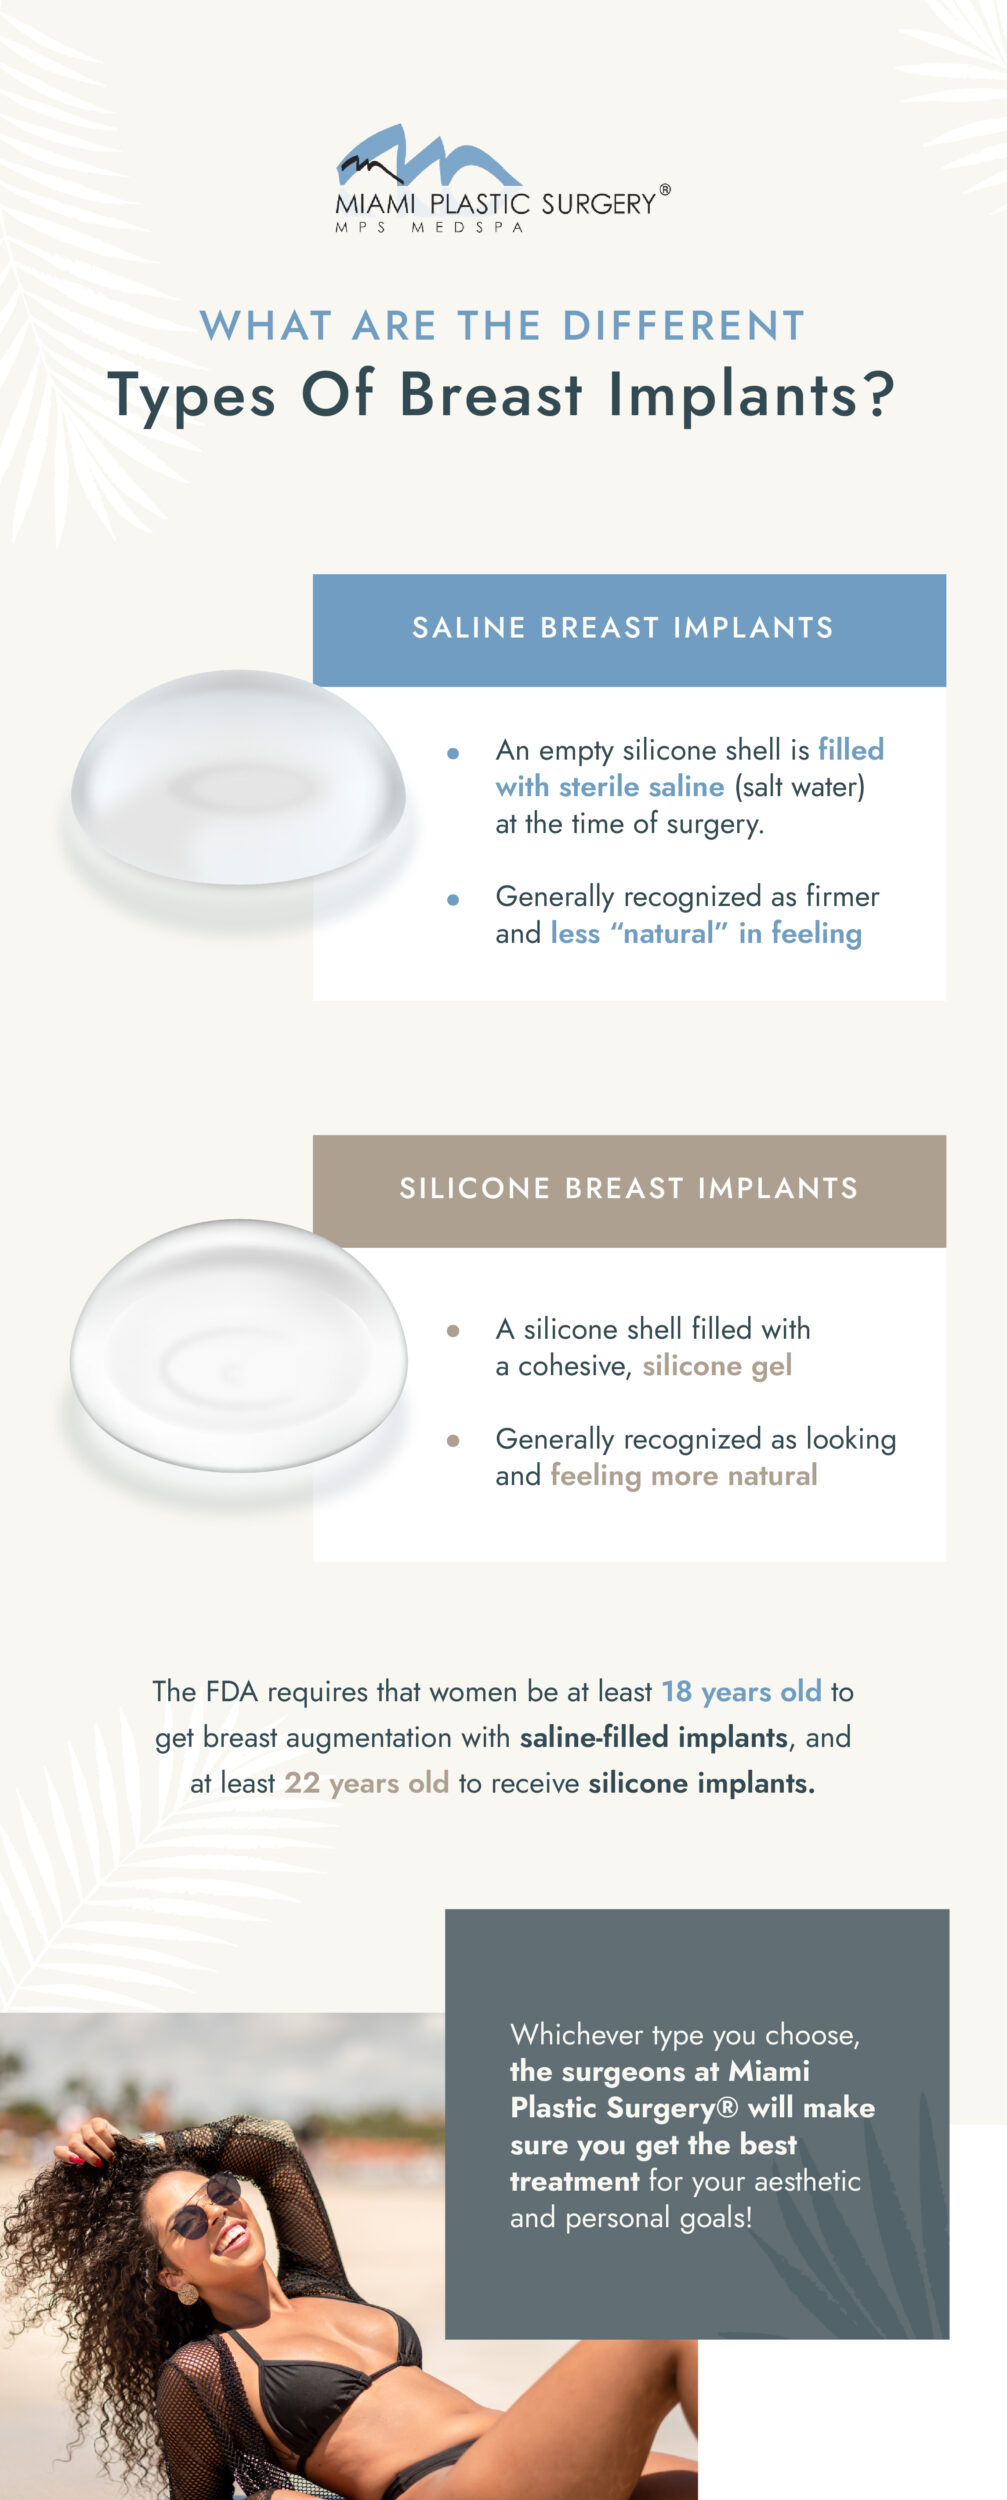 MG What Are The Different Types Of Breast Implants (Saline vs Silicone)